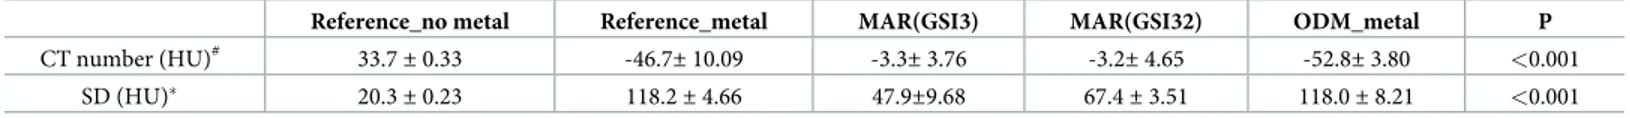 Table 3. Mean CT numbers (HU) and standard deviations (SD) of HU in the pelvic ROI among the reference, MAR, and ODM scans of the pelvic cavity